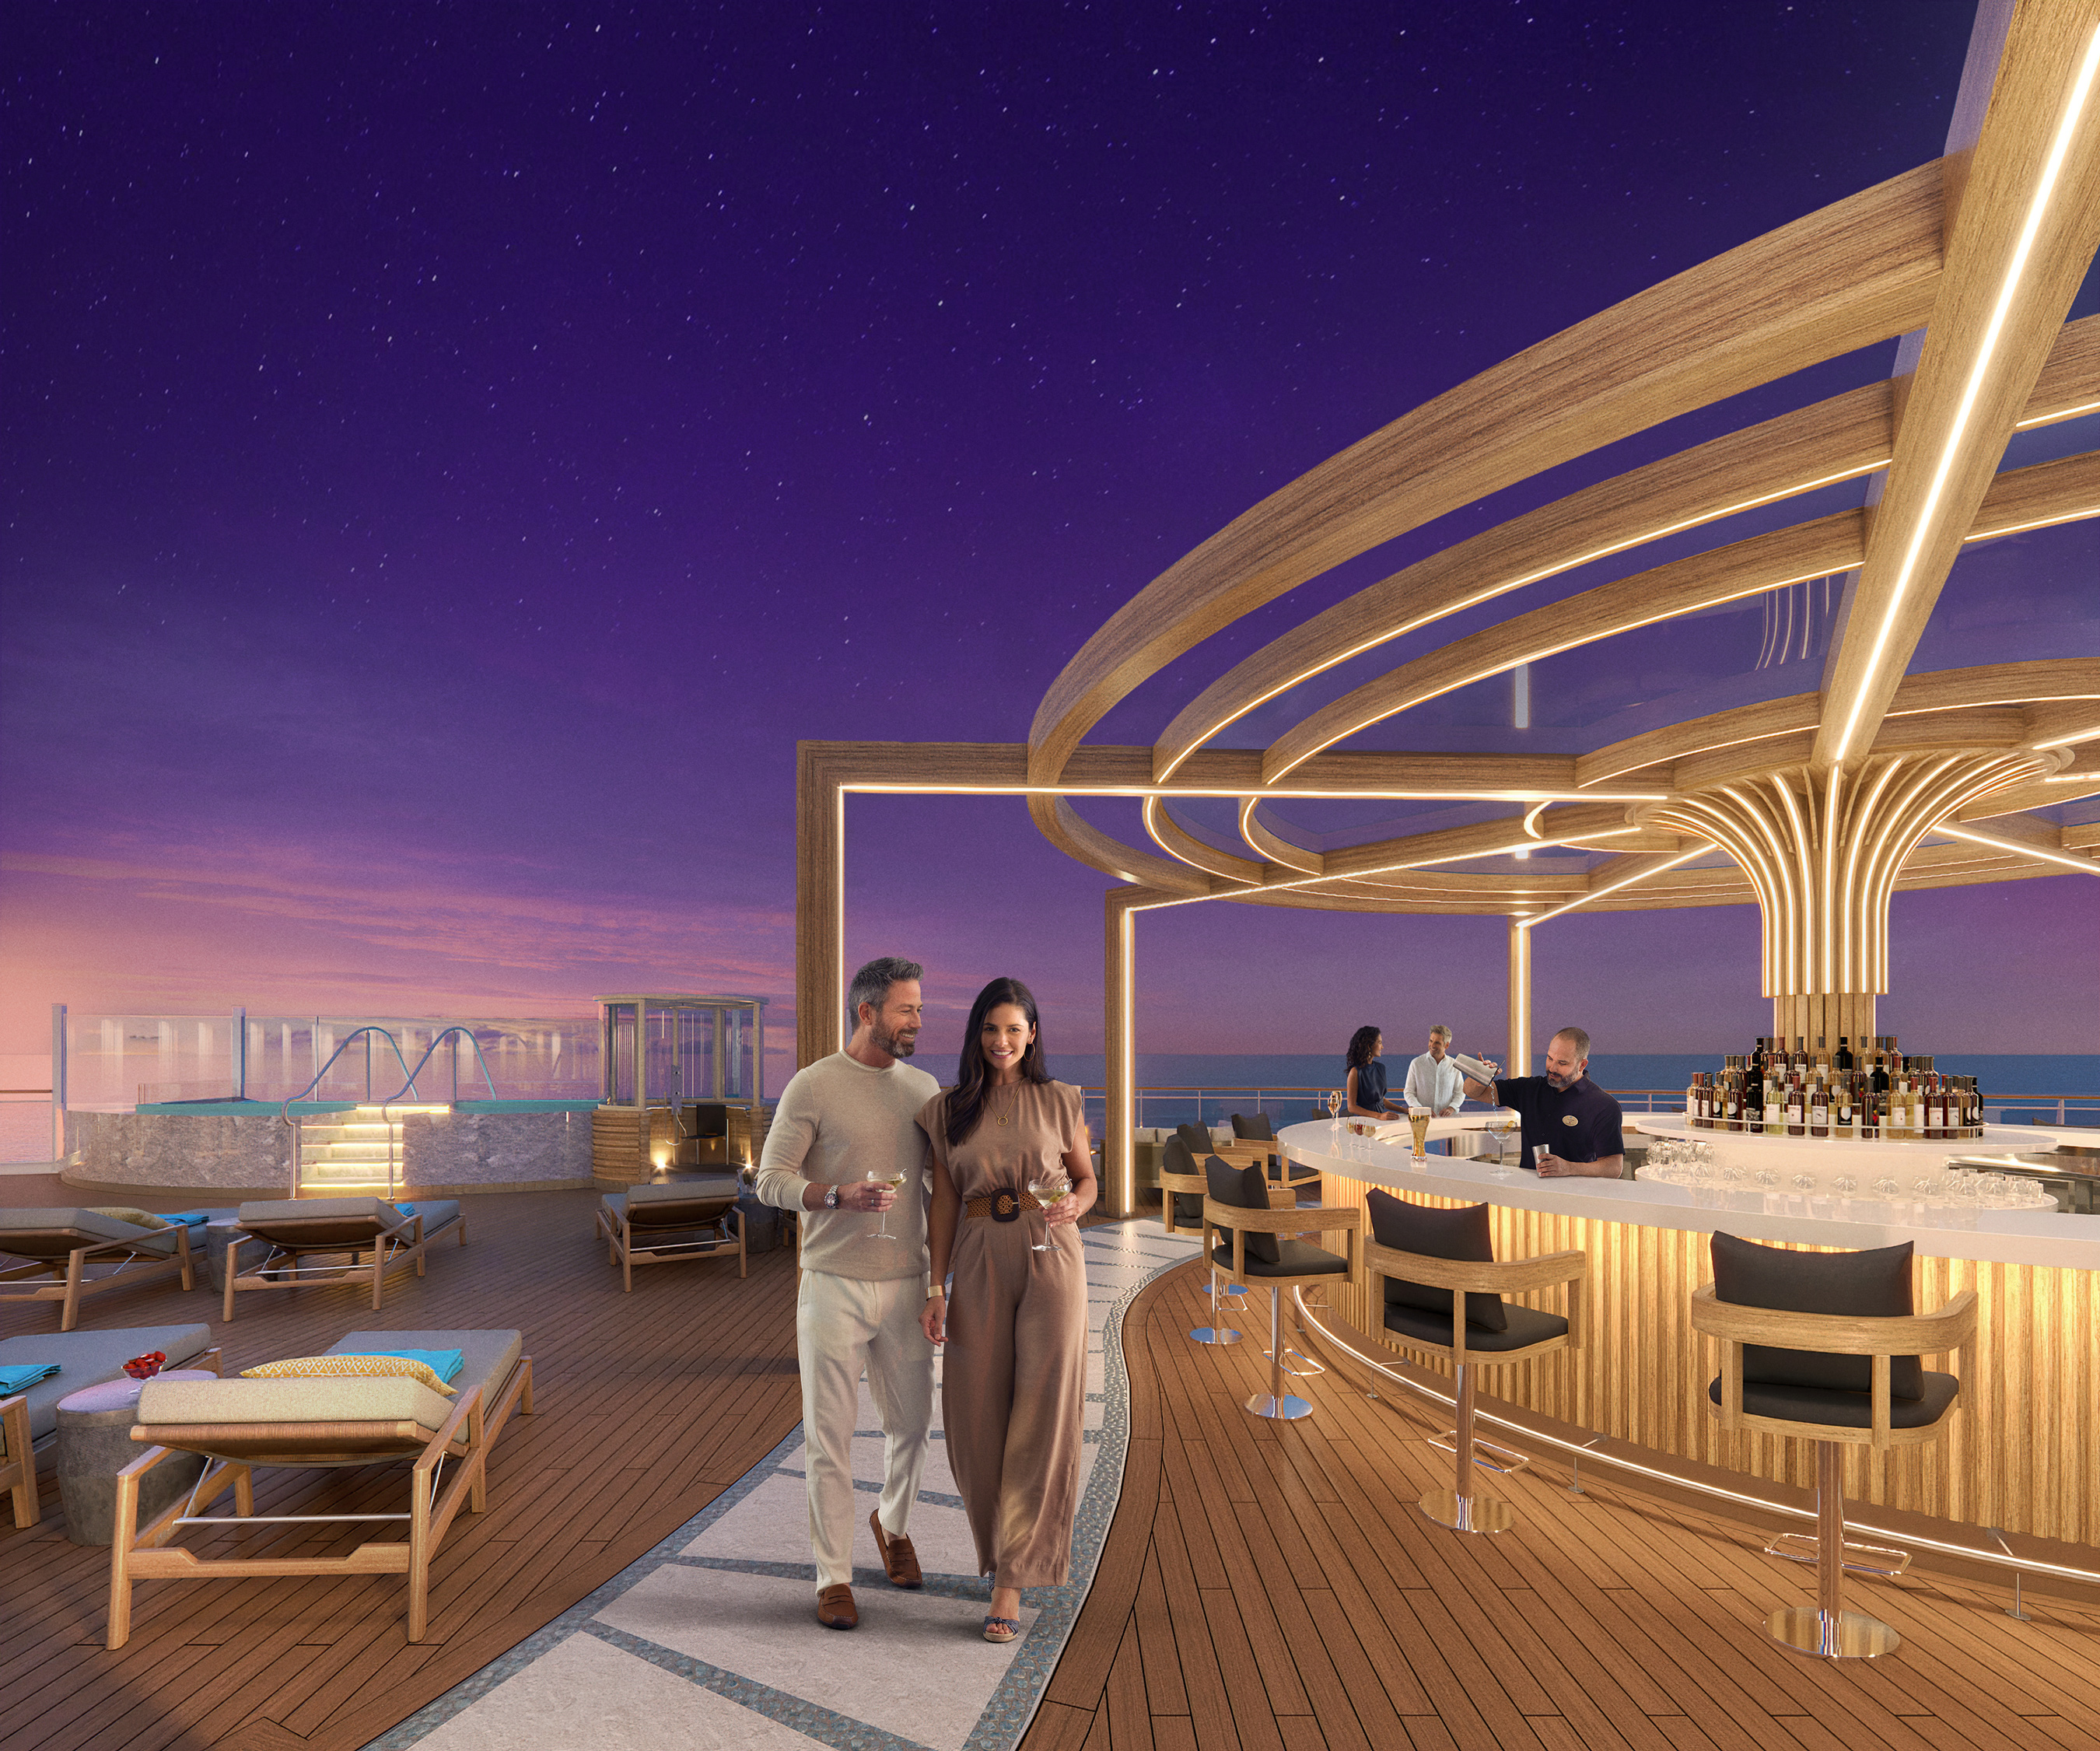 The adults-only Vibe Beach Club, located on Deck 17, will offer two infinity hot tubs and a dedicated bar. Norwegian Viva will provide guests with elevated experiences including more wide-open spaces, thoughtful and stunning design and exceptional service.